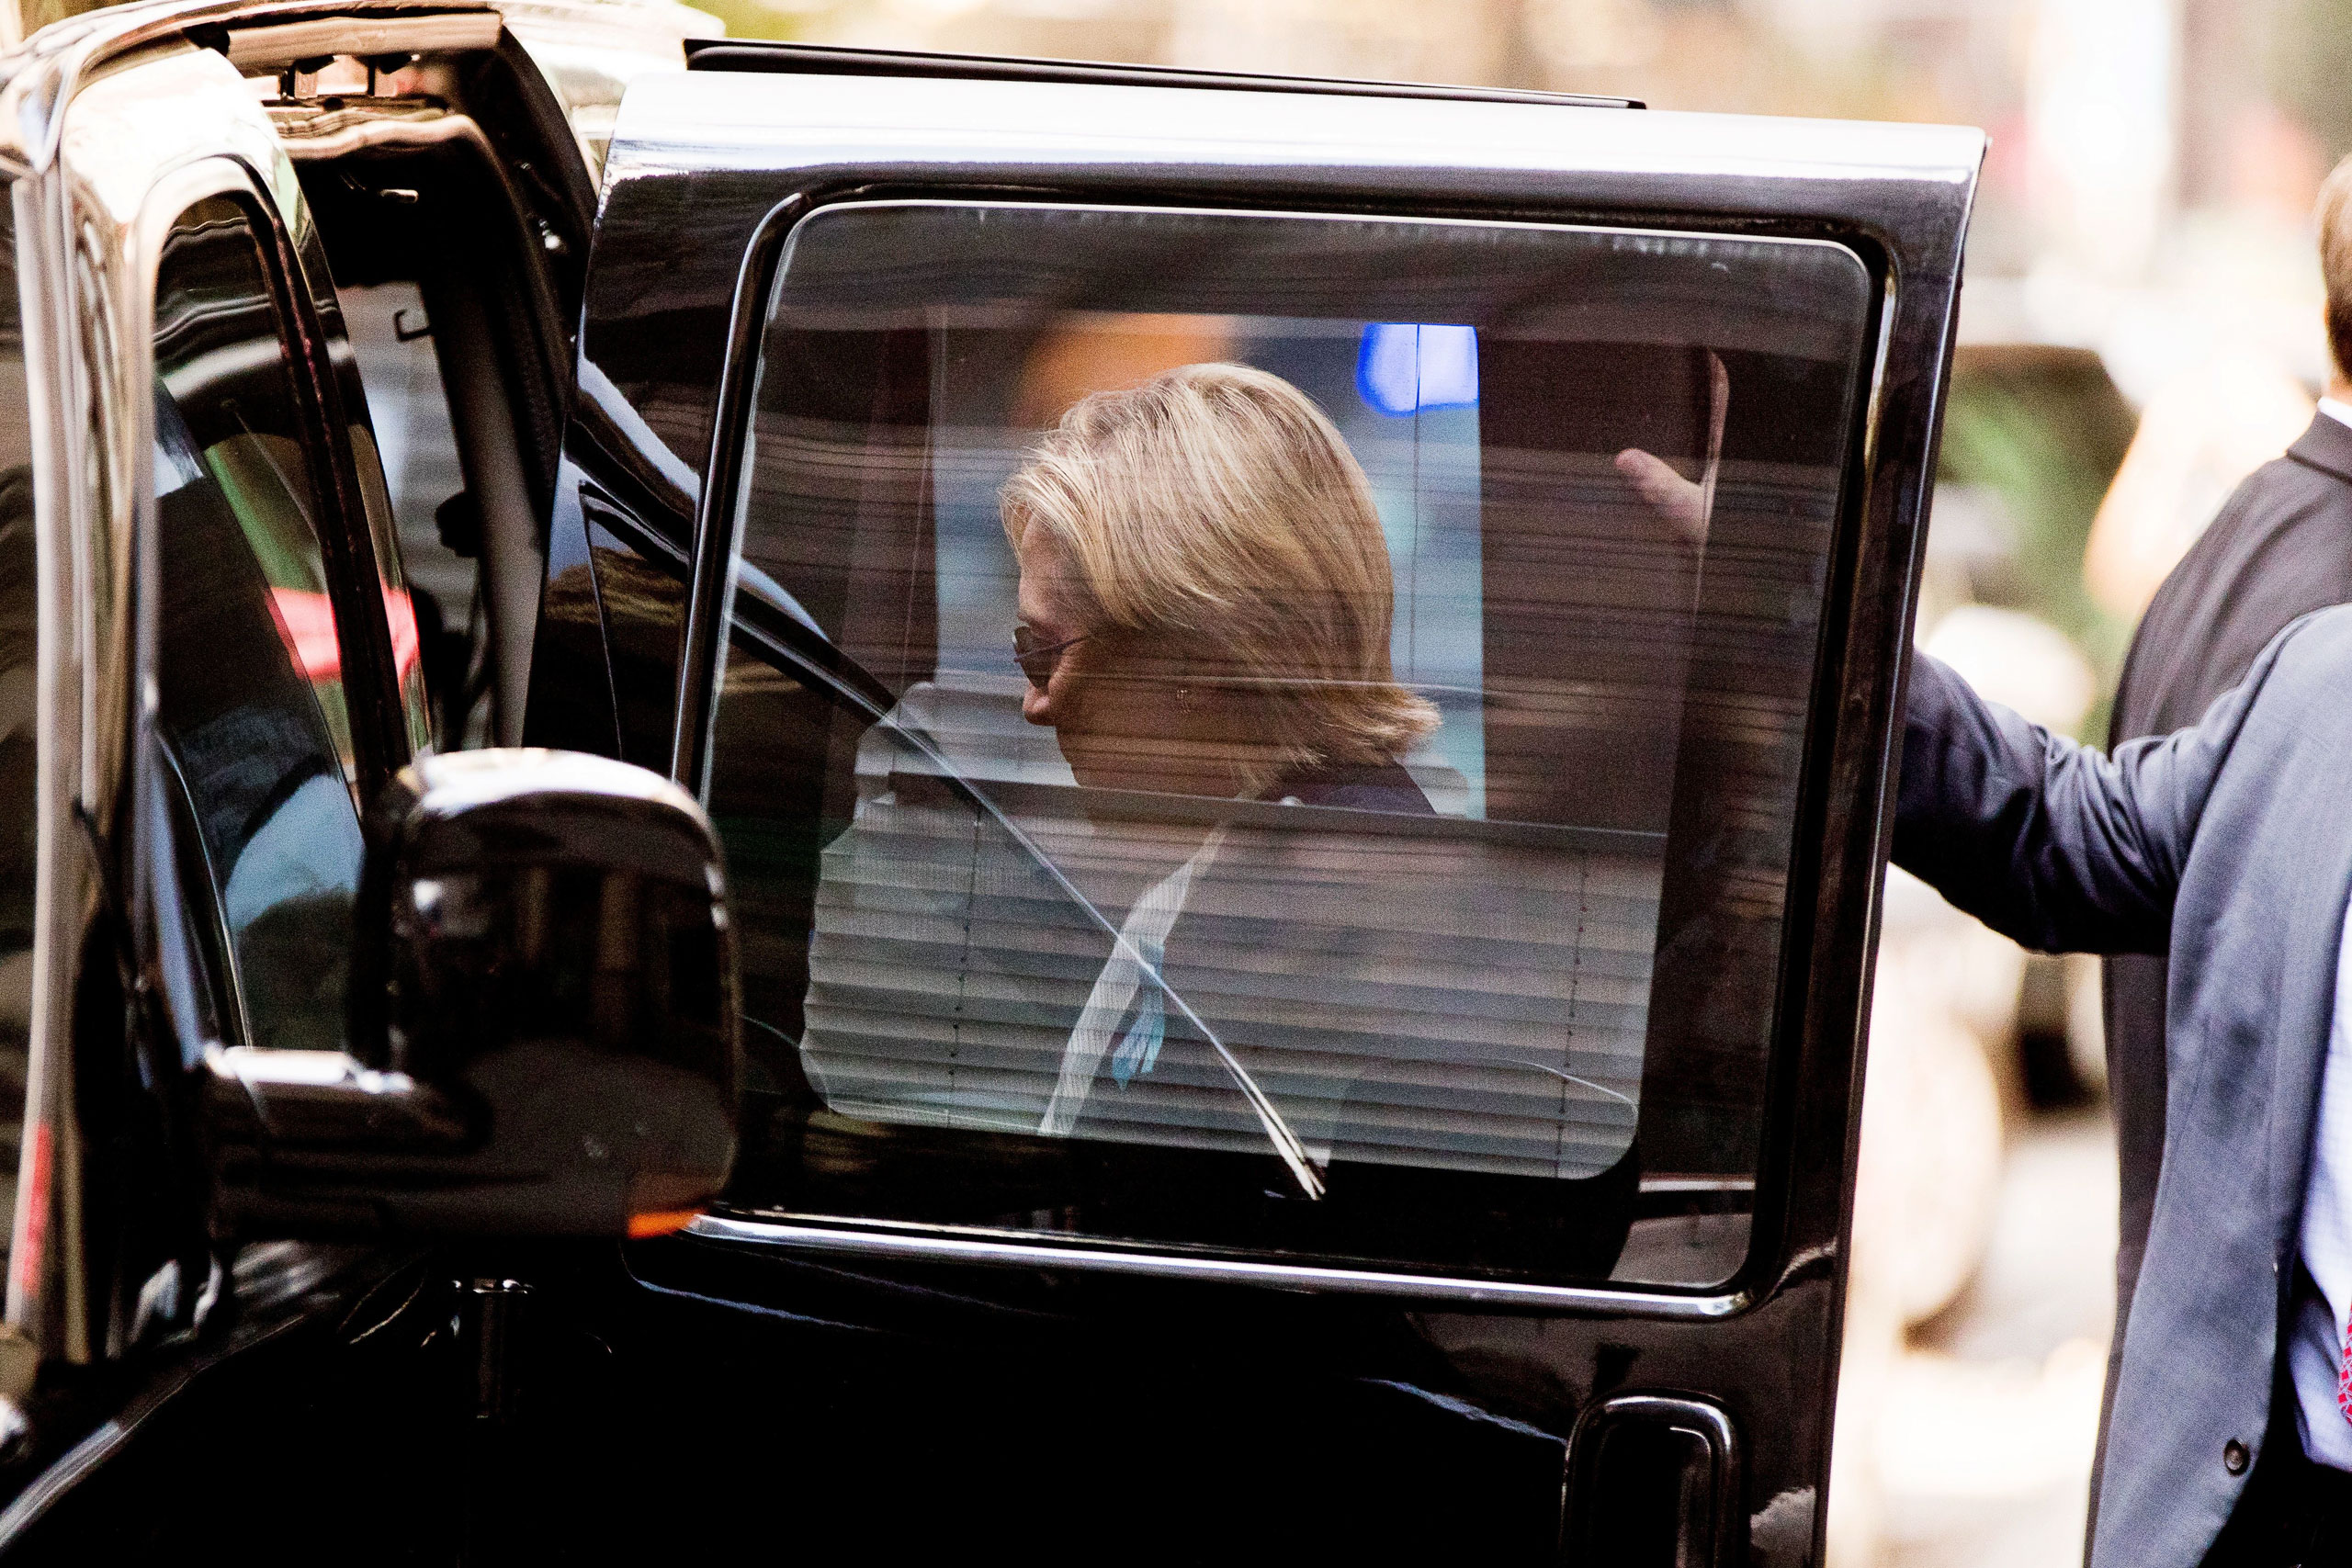 Clinton returns to her motorcade after briefly recuperating at her daughter Chelsea’s apartment (Andrew Harnik—AP)